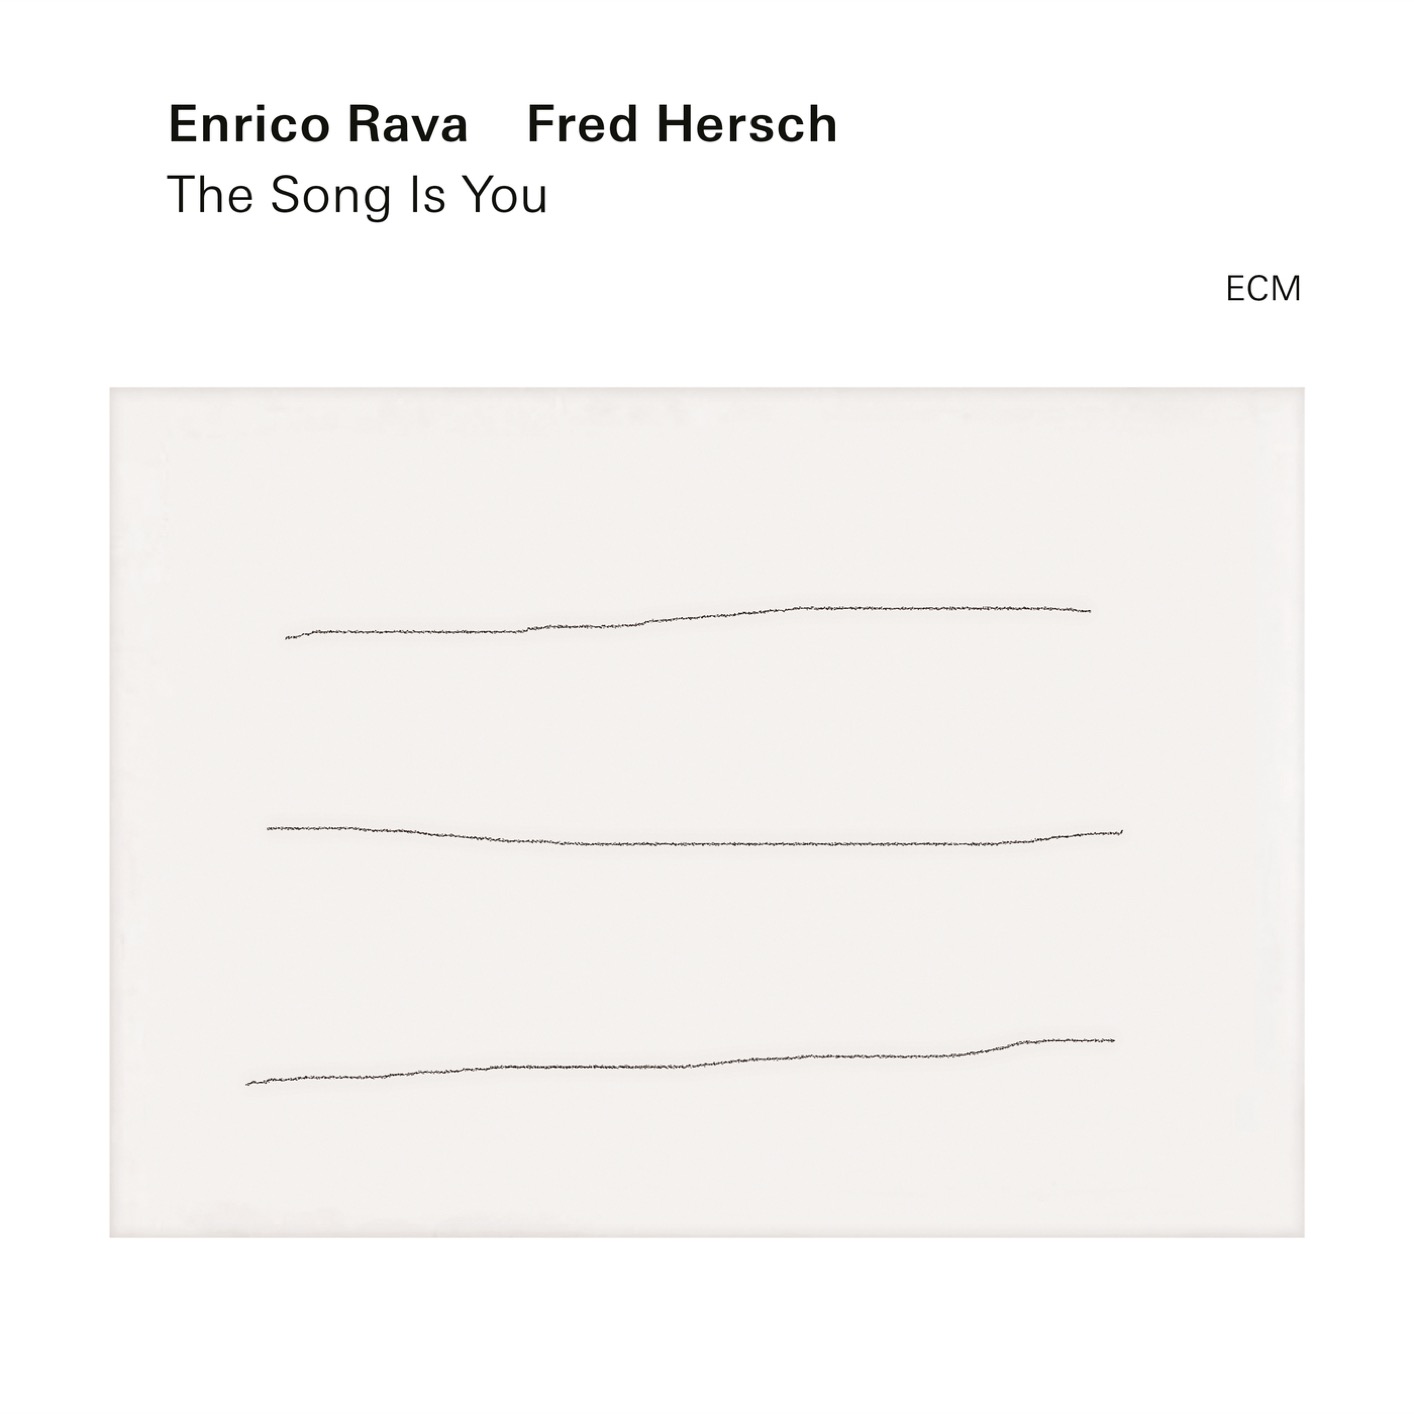 Enrico Rava, Fred Hersch: The Song Is You